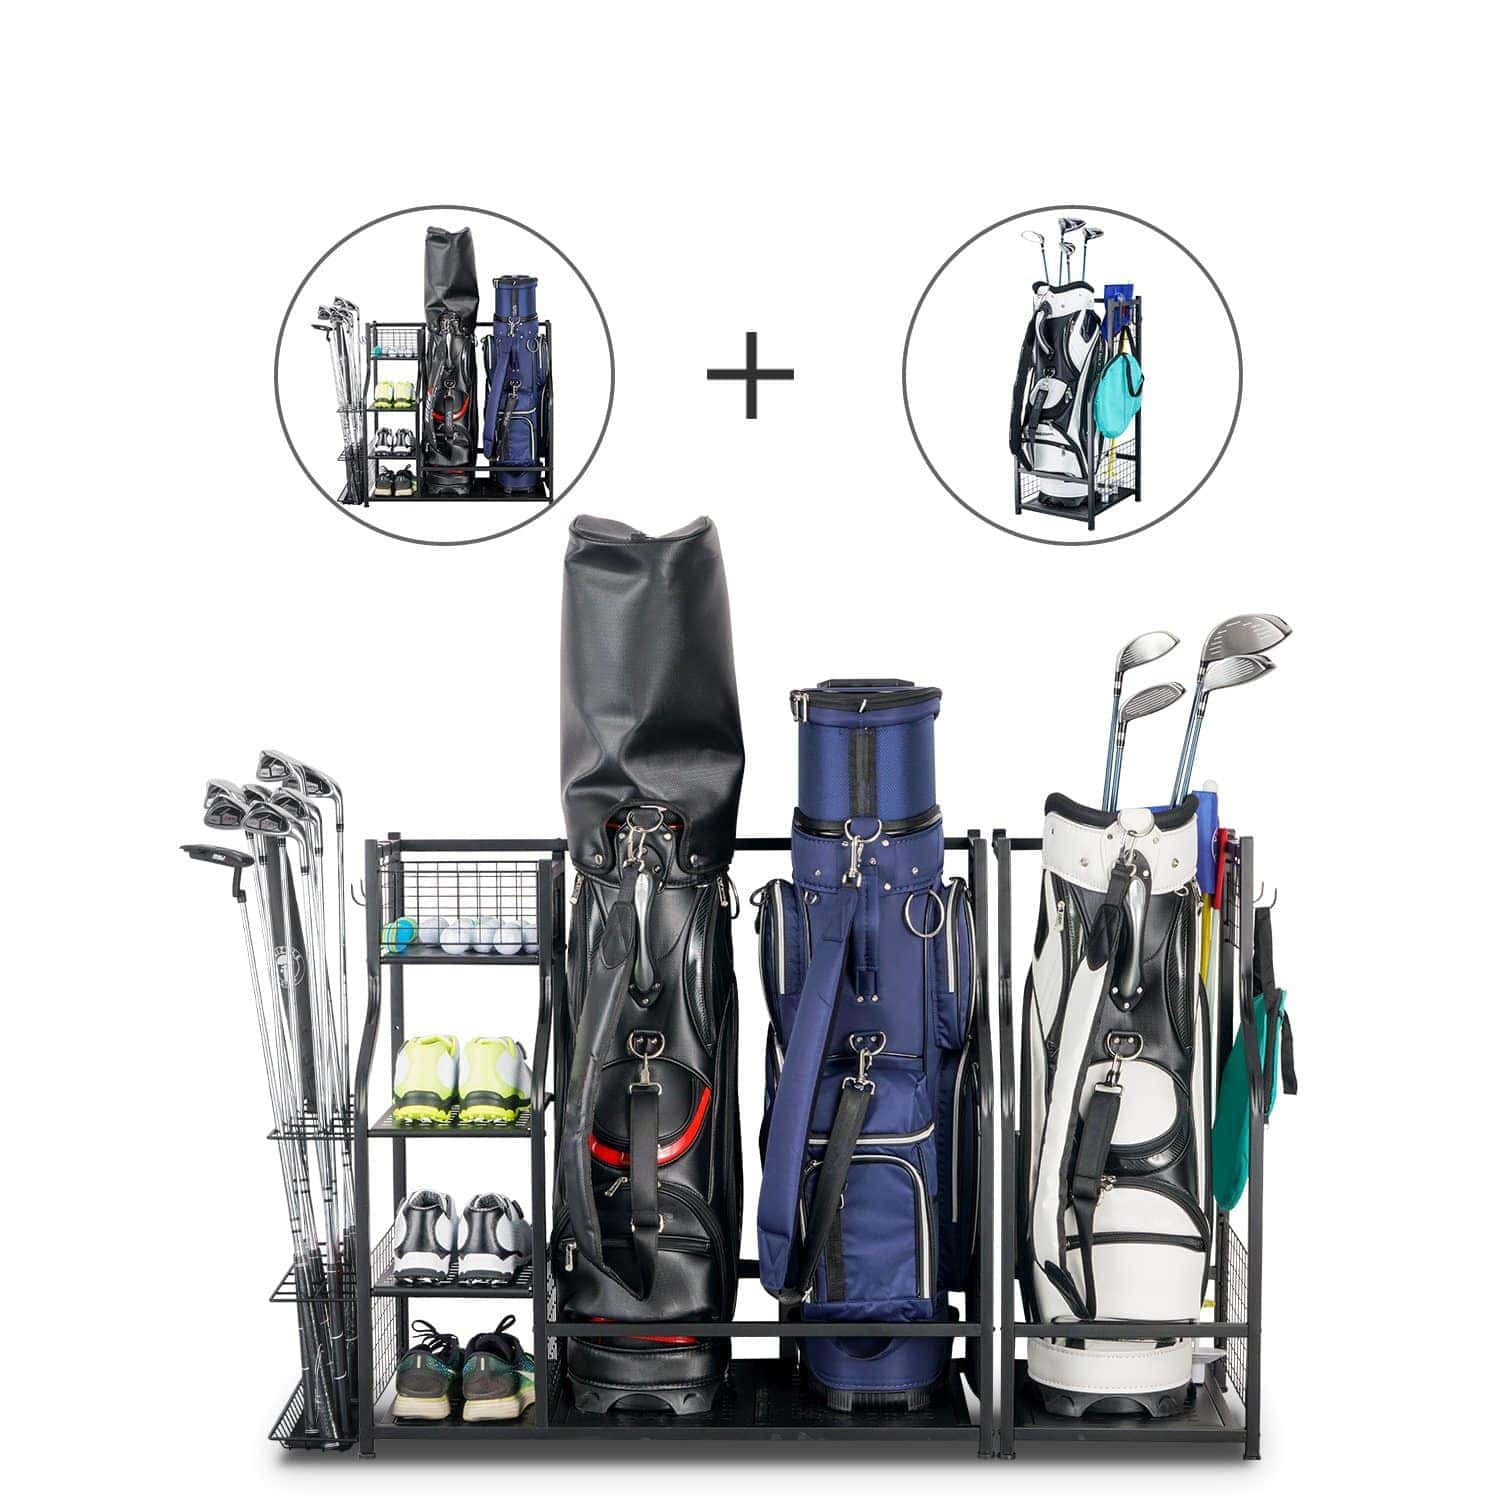 Morvat Extra-Large Golf Organizer Garage Organizer for Golf Gadgets, Golf  Bag and Golf Accessories MOR-MGO-2-A - The Home Depot